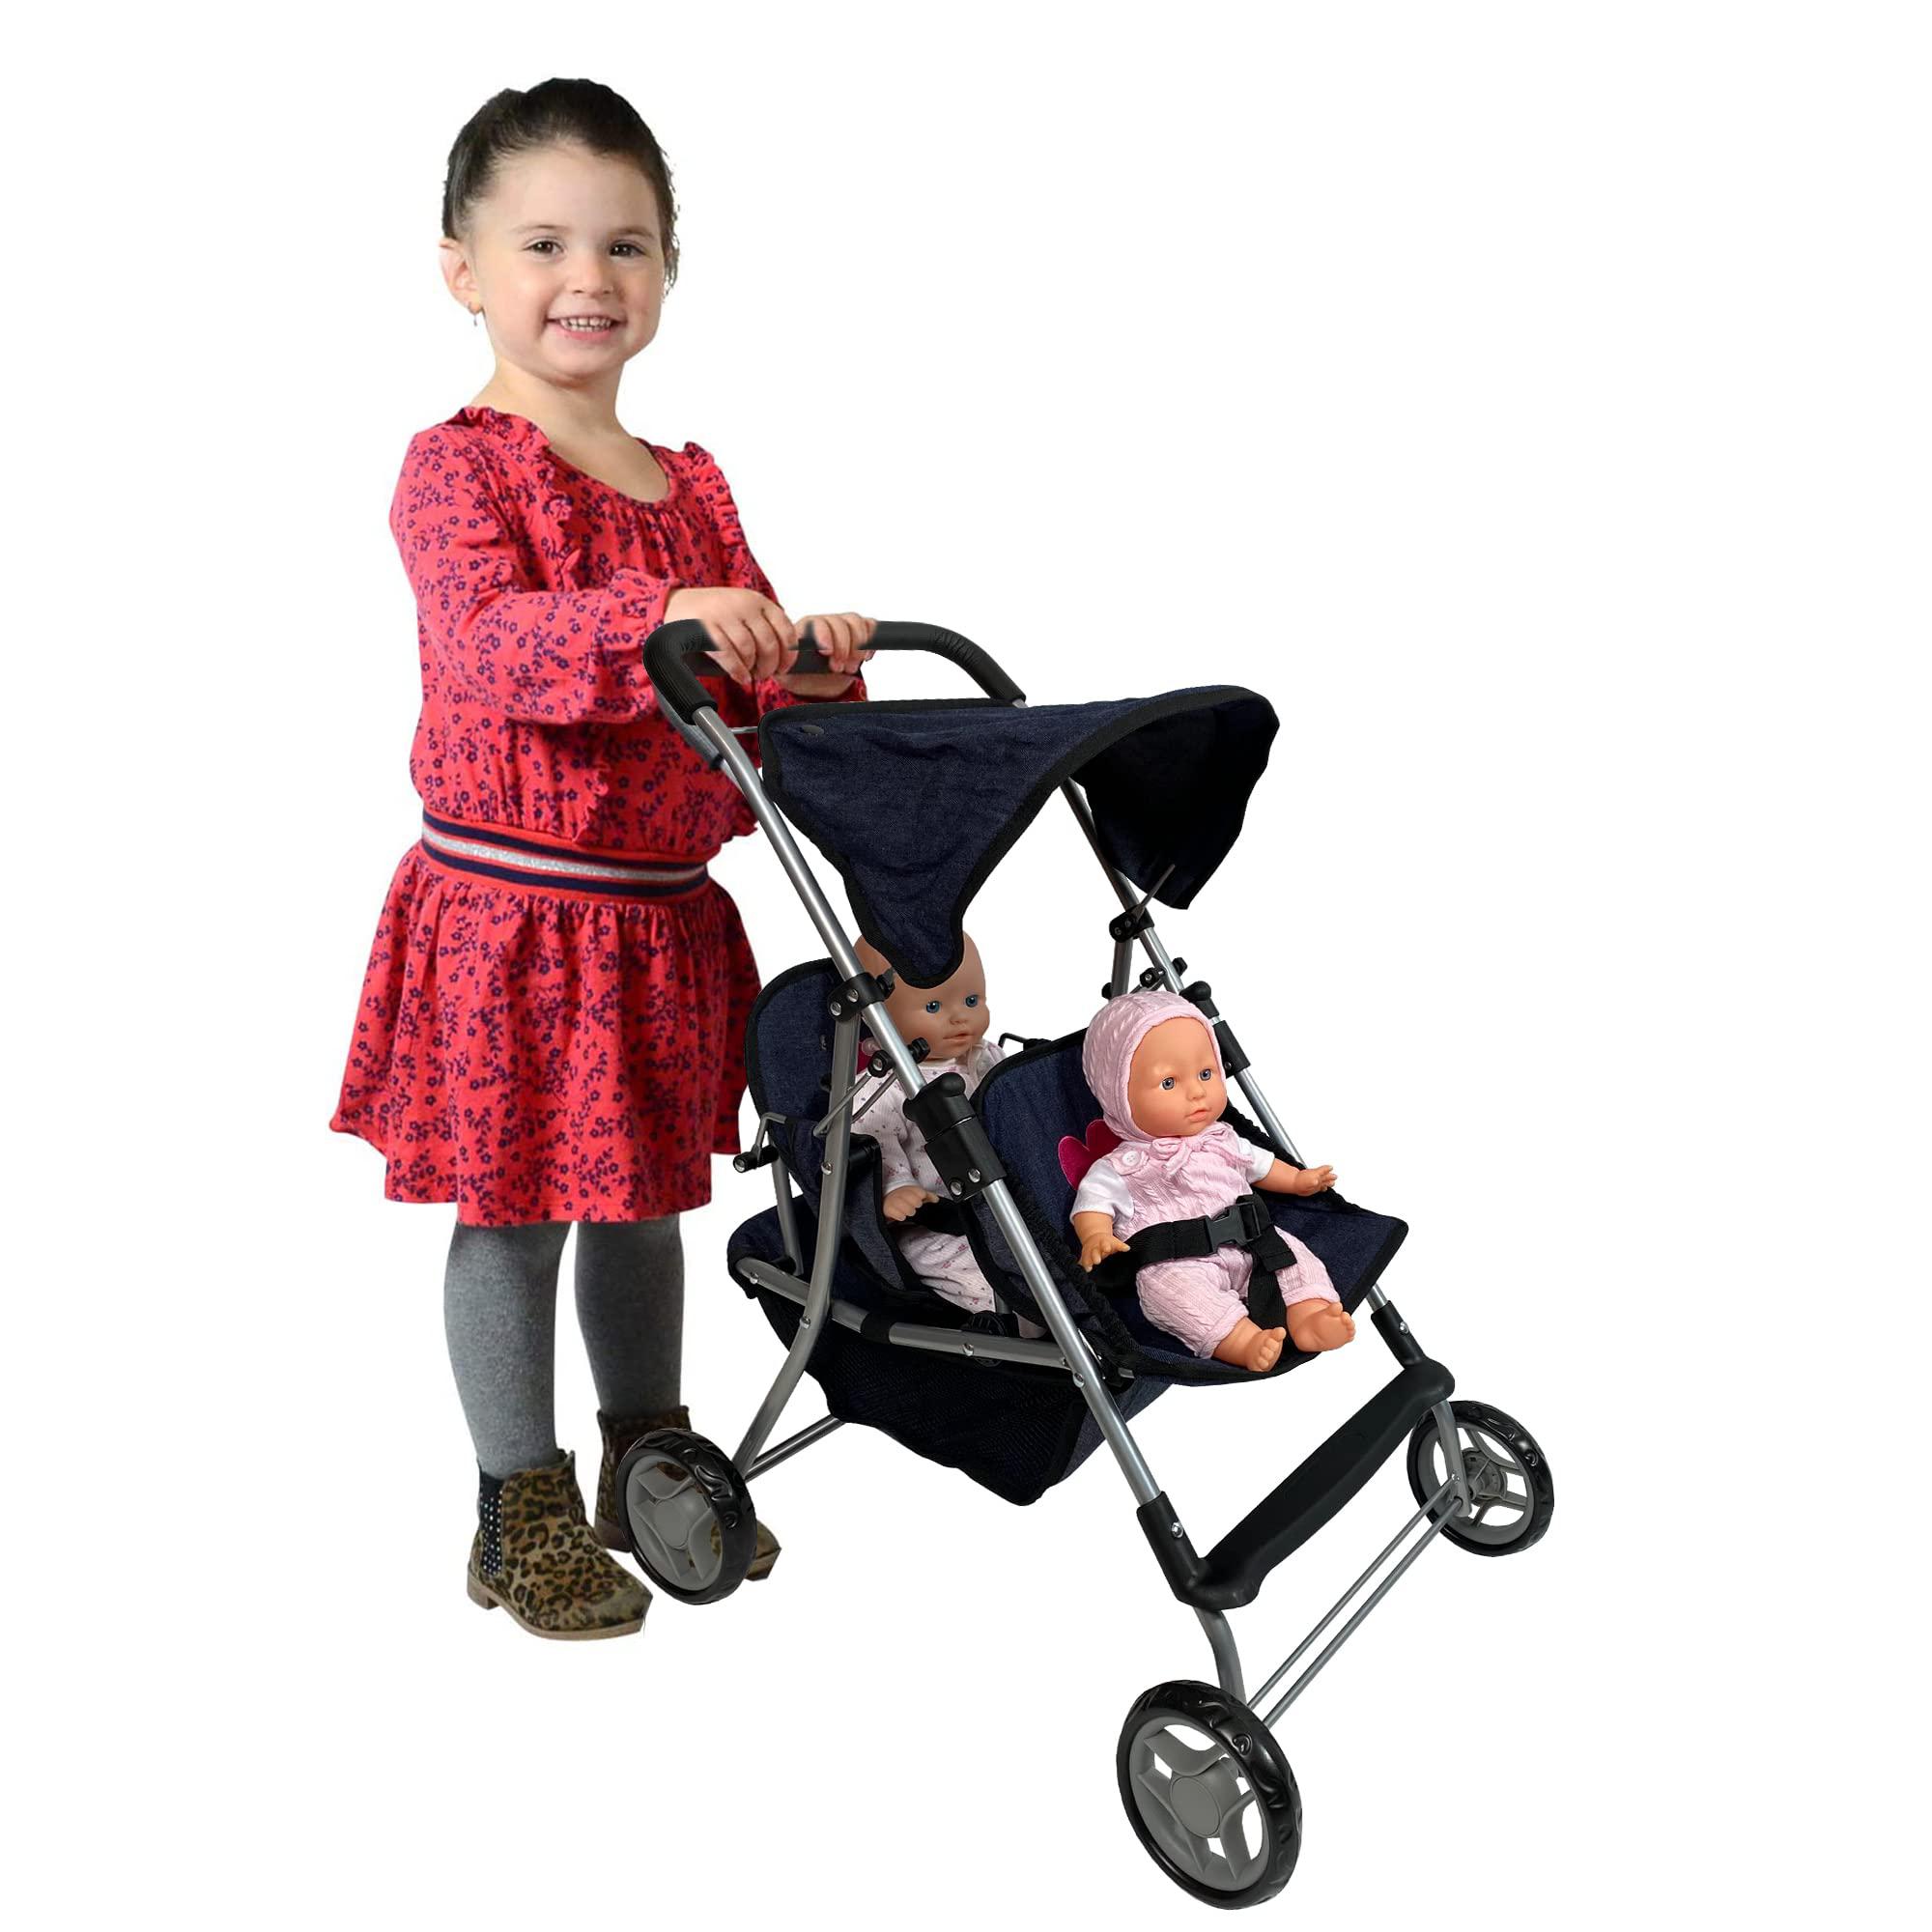 The New York Doll Collection double baby doll stroller for twin dolls | toy doll stroller for toddlers, 4 year old, 5 year old girls, 8 year old | 25 tand